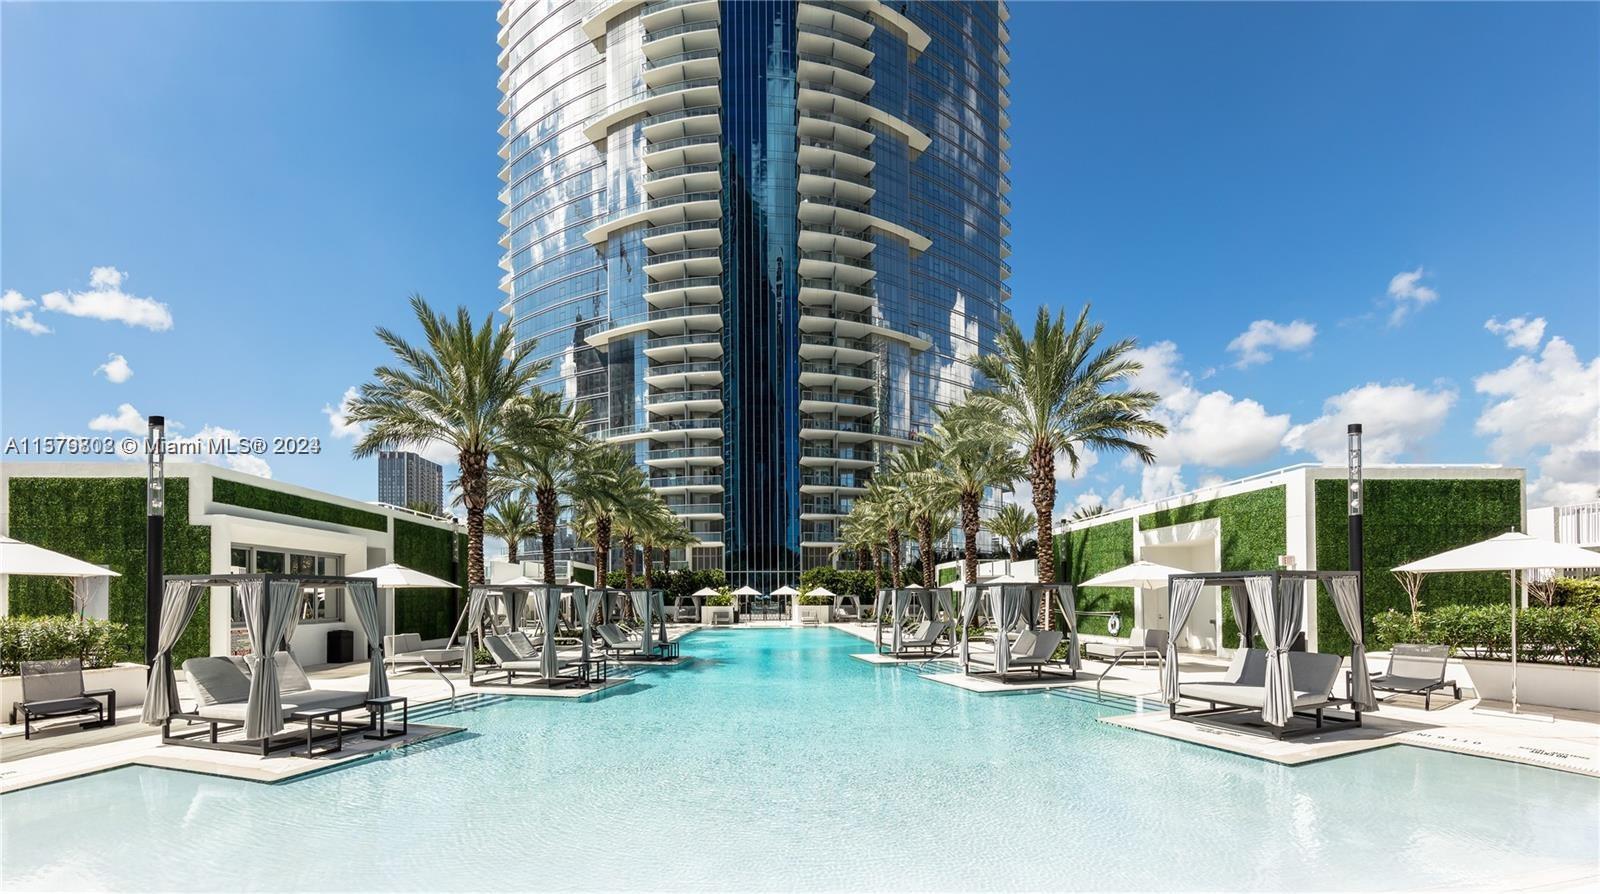 Experience luxury living at the new Paramount Miami World Center with this fully furnished 3-bedroom apartment. The unit has a private entrance, European kitchen, oversized balcony, shades, and walk-in closets. Steps away from numerous attractions, including the Miami-Dade Arena, Port of Miami, Brightline and Metro Mover Stations and Bayside. The building offers unparalleled amenities such as a basketball court, five pools, a recording studio, and tennis courts, making it one of the most desirable buildings in Miami. This spacious unit even includes a third bedroom, a private elevator foyer, and a large terrace to take in stunning city sunset views. AVAILABLE UNTIL DEC 1st ONLY !!!